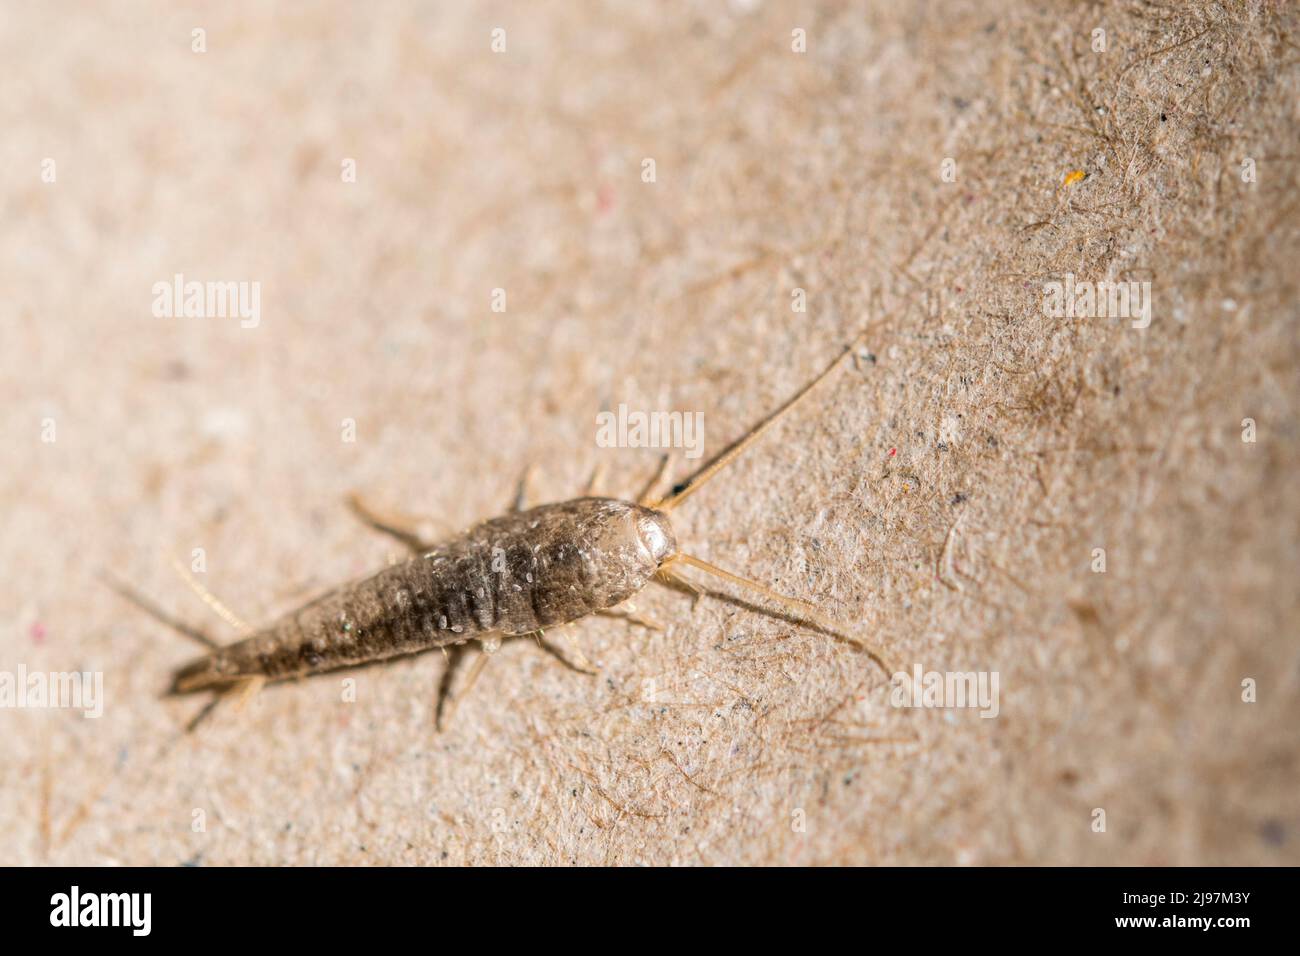 silverfish (Lepisma saccharinum) is a species of small, primitive, wingless insect in the order Zygentoma (formerly Thysanura). Stock Photo